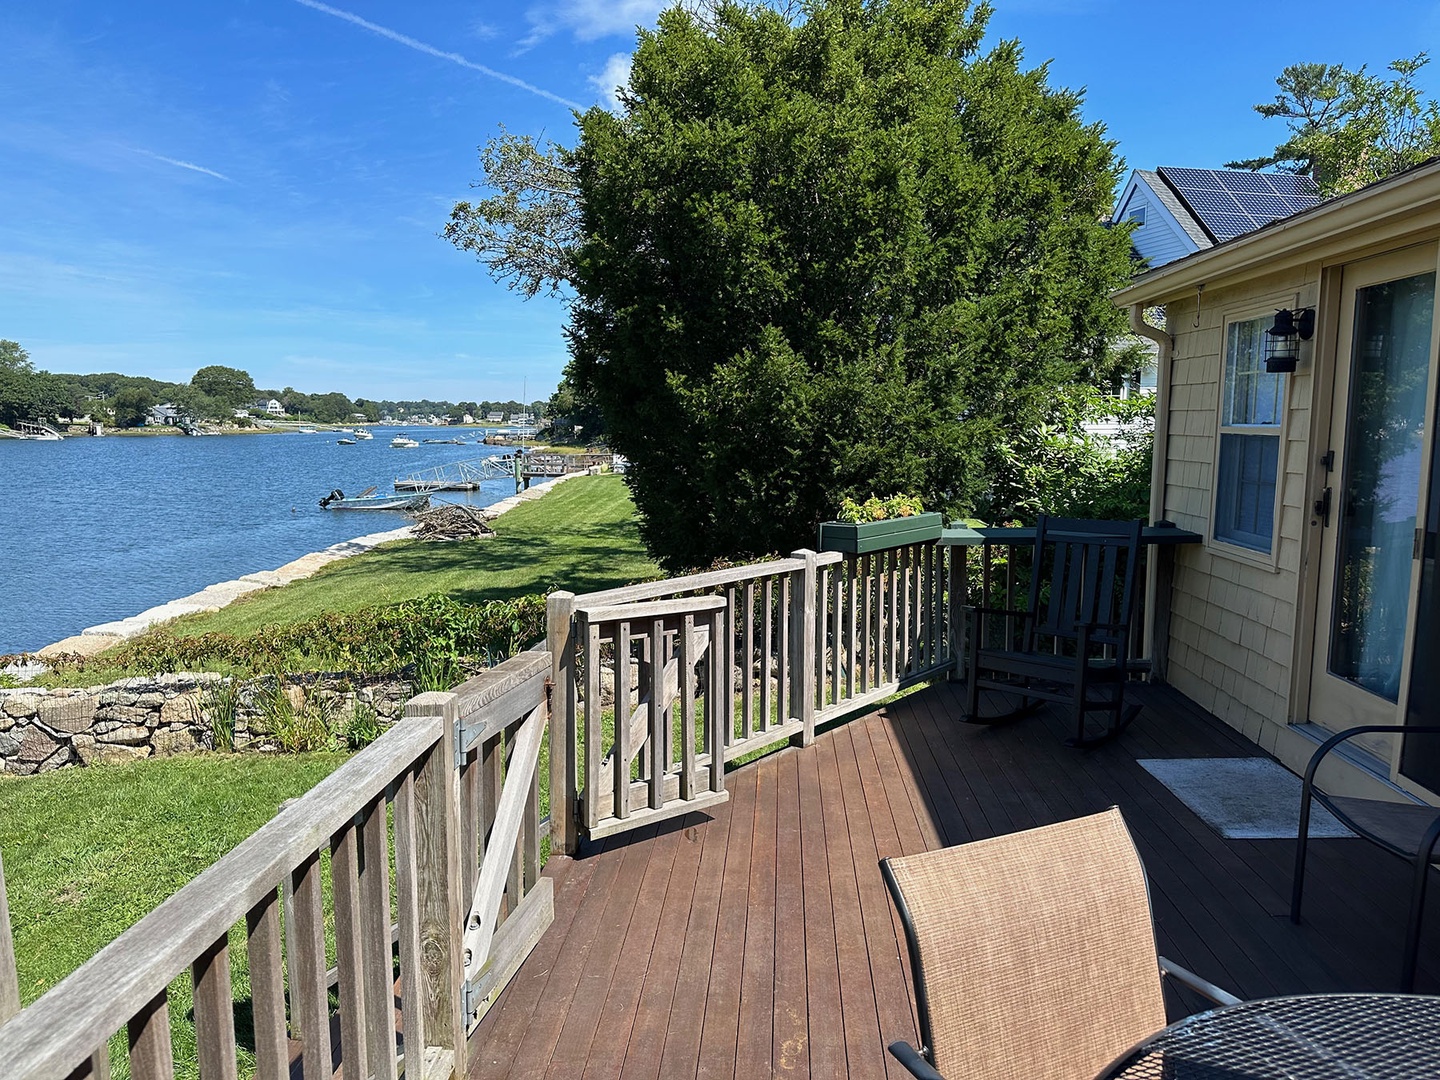 The generously sized deck overlooks the water.